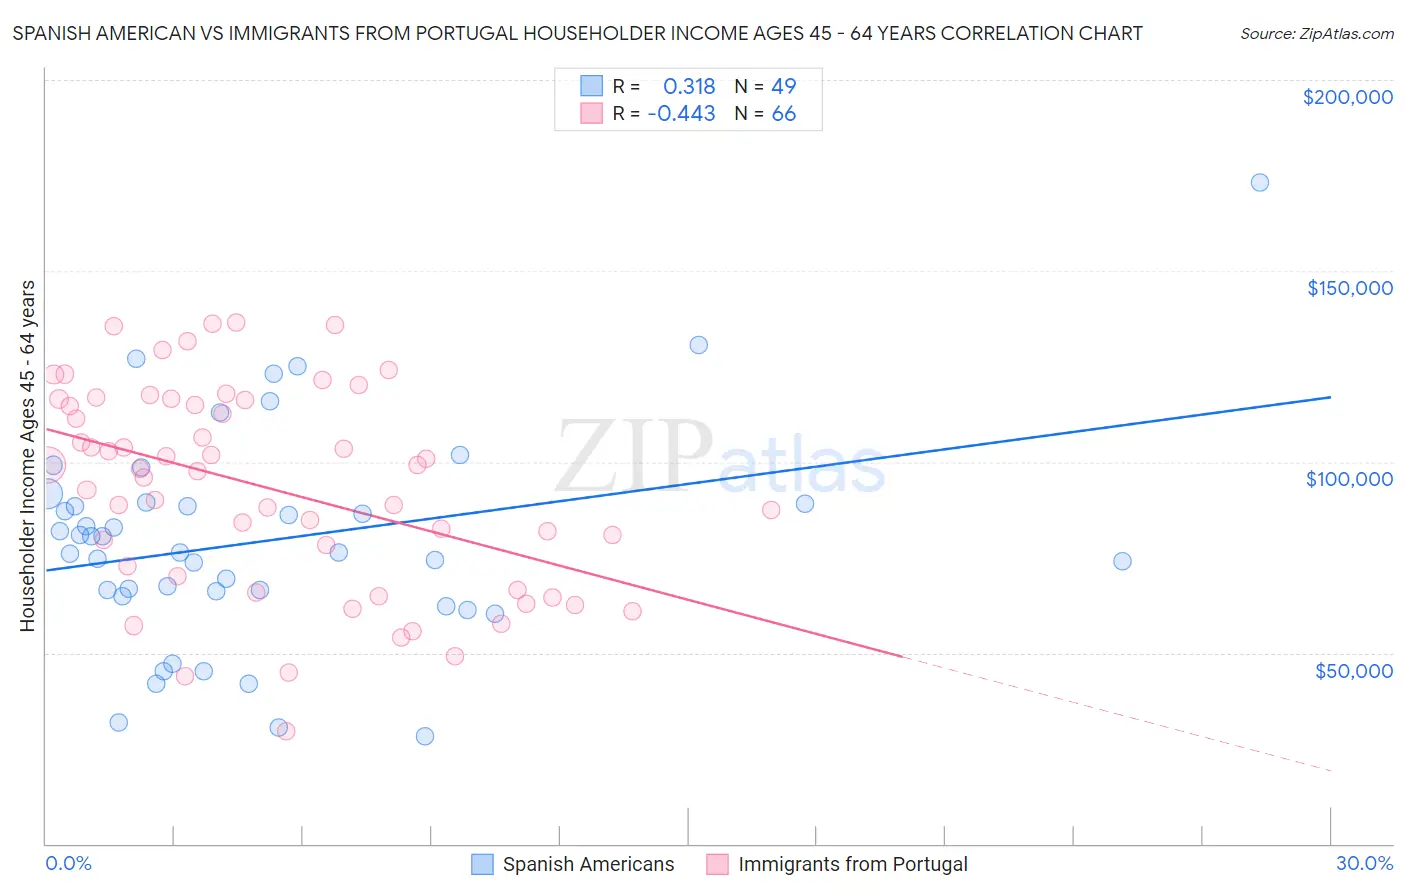 Spanish American vs Immigrants from Portugal Householder Income Ages 45 - 64 years